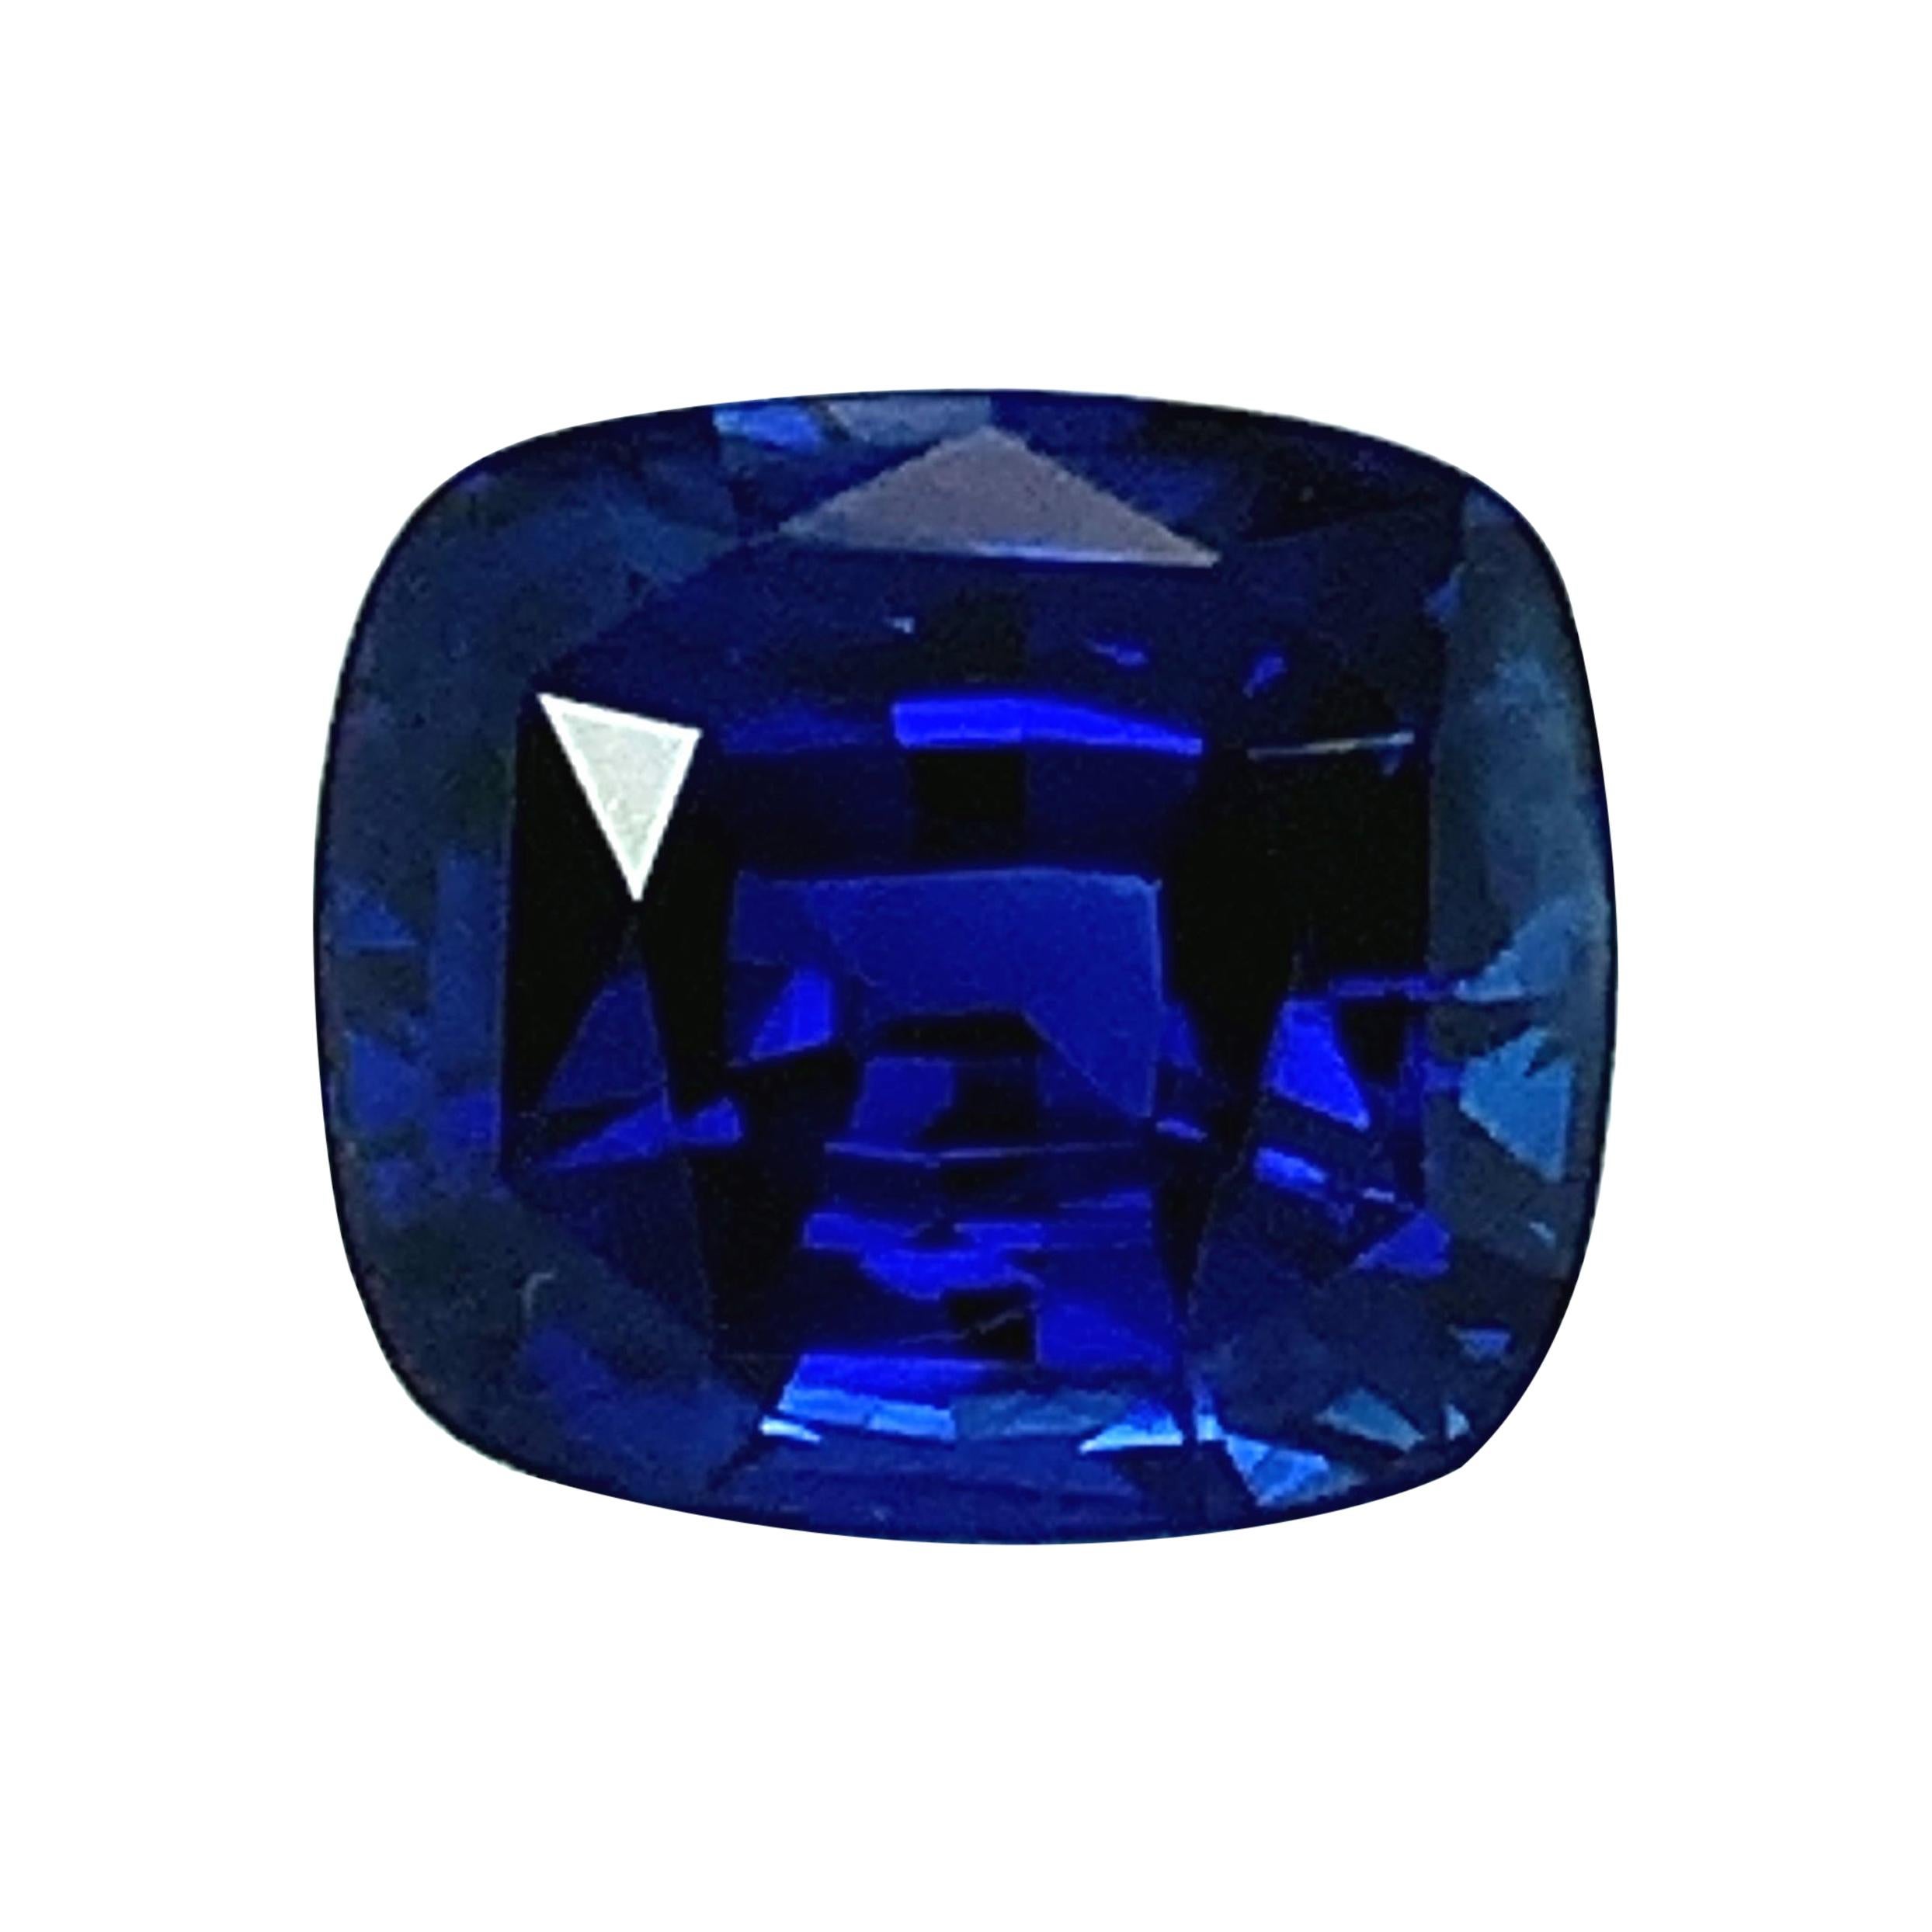 This extremely fine cushion-shaped blue sapphire is what dreams are made of. This exquisite gem possesses exceptionally fine color - the perfect shade of vivid, rich blue, with excellent color saturation and superior clarity. It measures 10.12 x